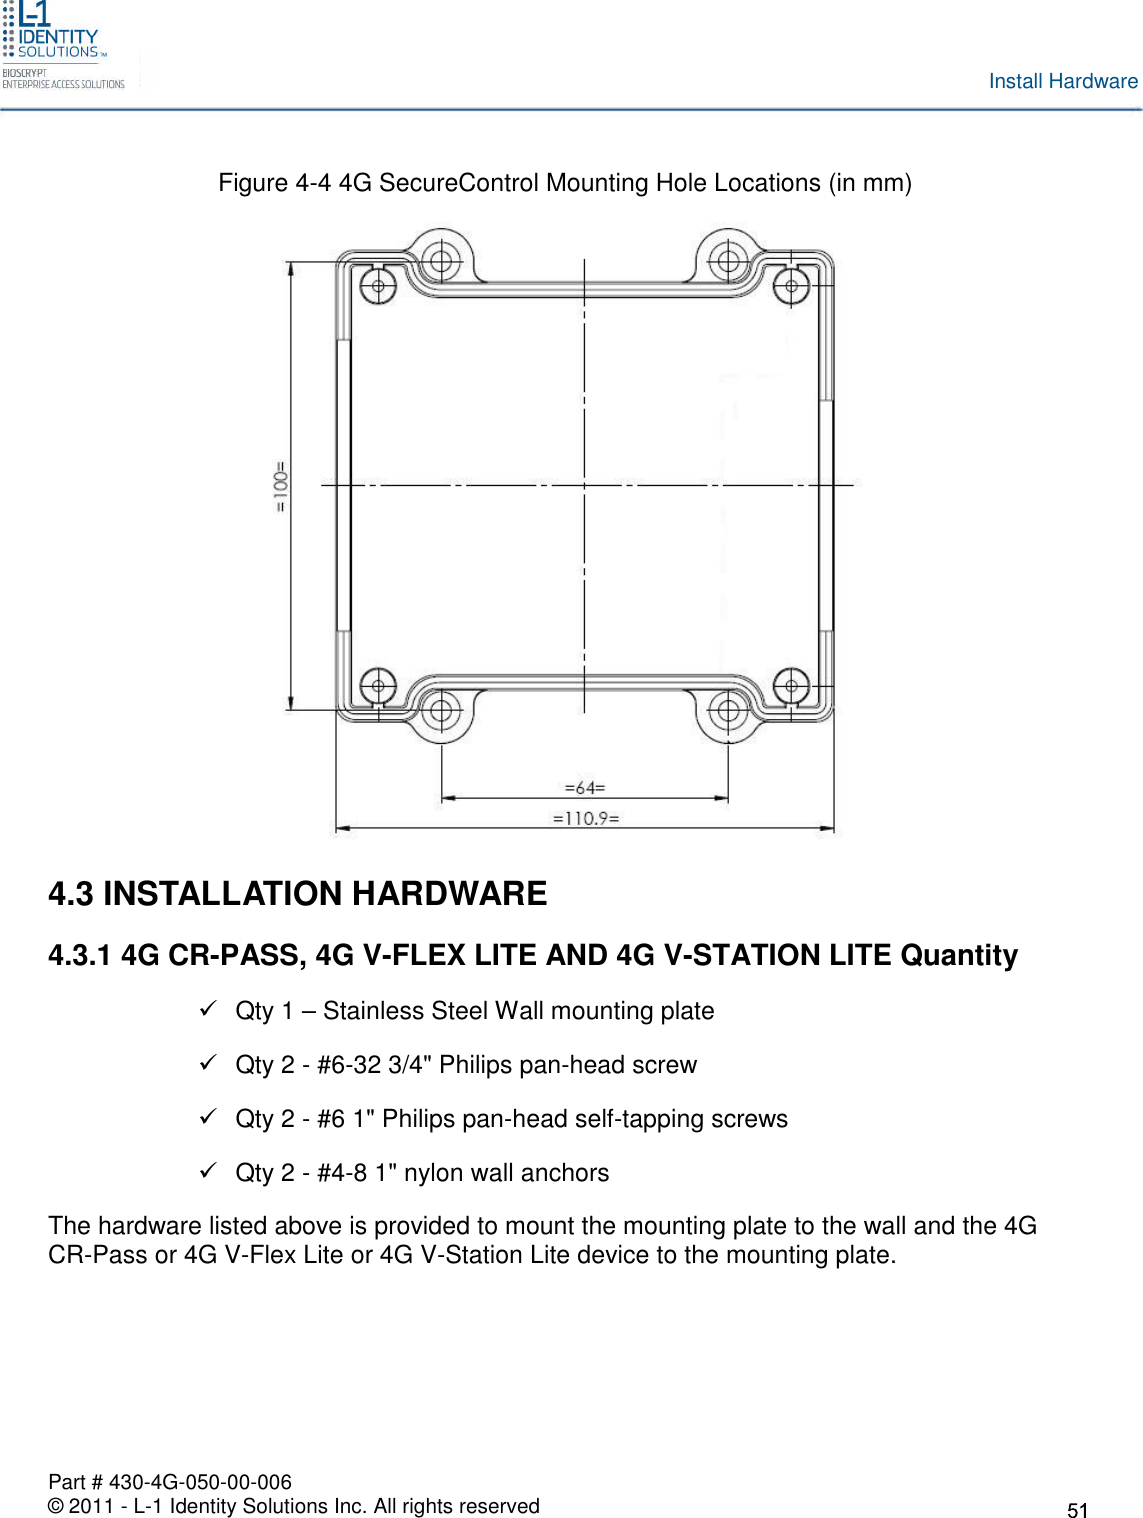 Part # 430-4G-050-00-006© 2011 - L-1 Identity Solutions Inc. All rights reservedInstall HardwareFigure 4-4 4G SecureControl Mounting Hole Locations (in mm)4.3 INSTALLATION HARDWARE4.3.1 4G CR-PASS, 4G V-FLEX LITE AND 4G V-STATION LITE QuantityQty 1 – Stainless Steel Wall mounting plateQty 2 - #6-32 3/4&quot; Philips pan-head screwQty 2 - #6 1&quot; Philips pan-head self-tapping screwsQty 2 - #4-8 1&quot; nylon wall anchorsThe hardware listed above is provided to mount the mounting plate to the wall and the 4GCR-Pass or 4G V-Flex Lite or 4G V-Station Lite device to the mounting plate.